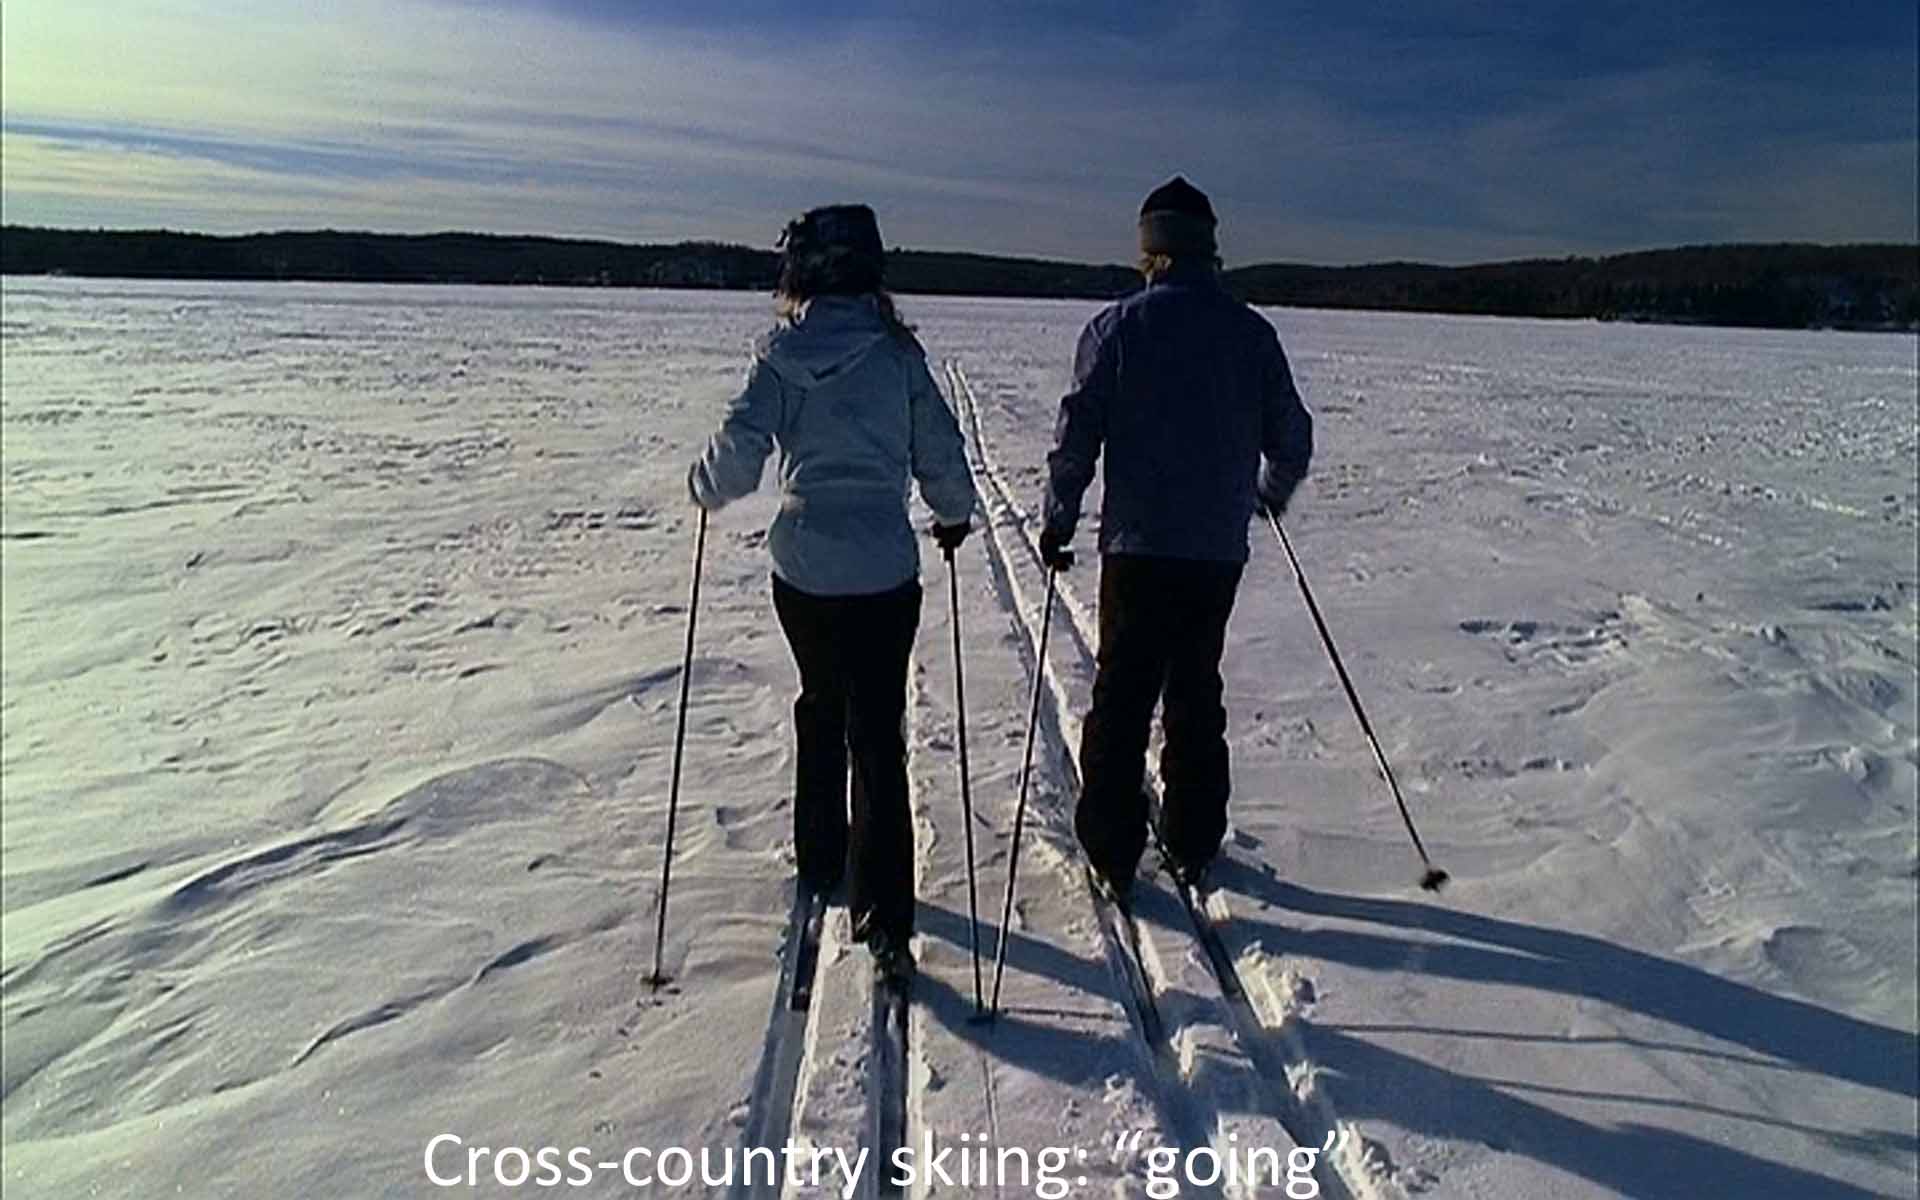 Cross-country skiing, going